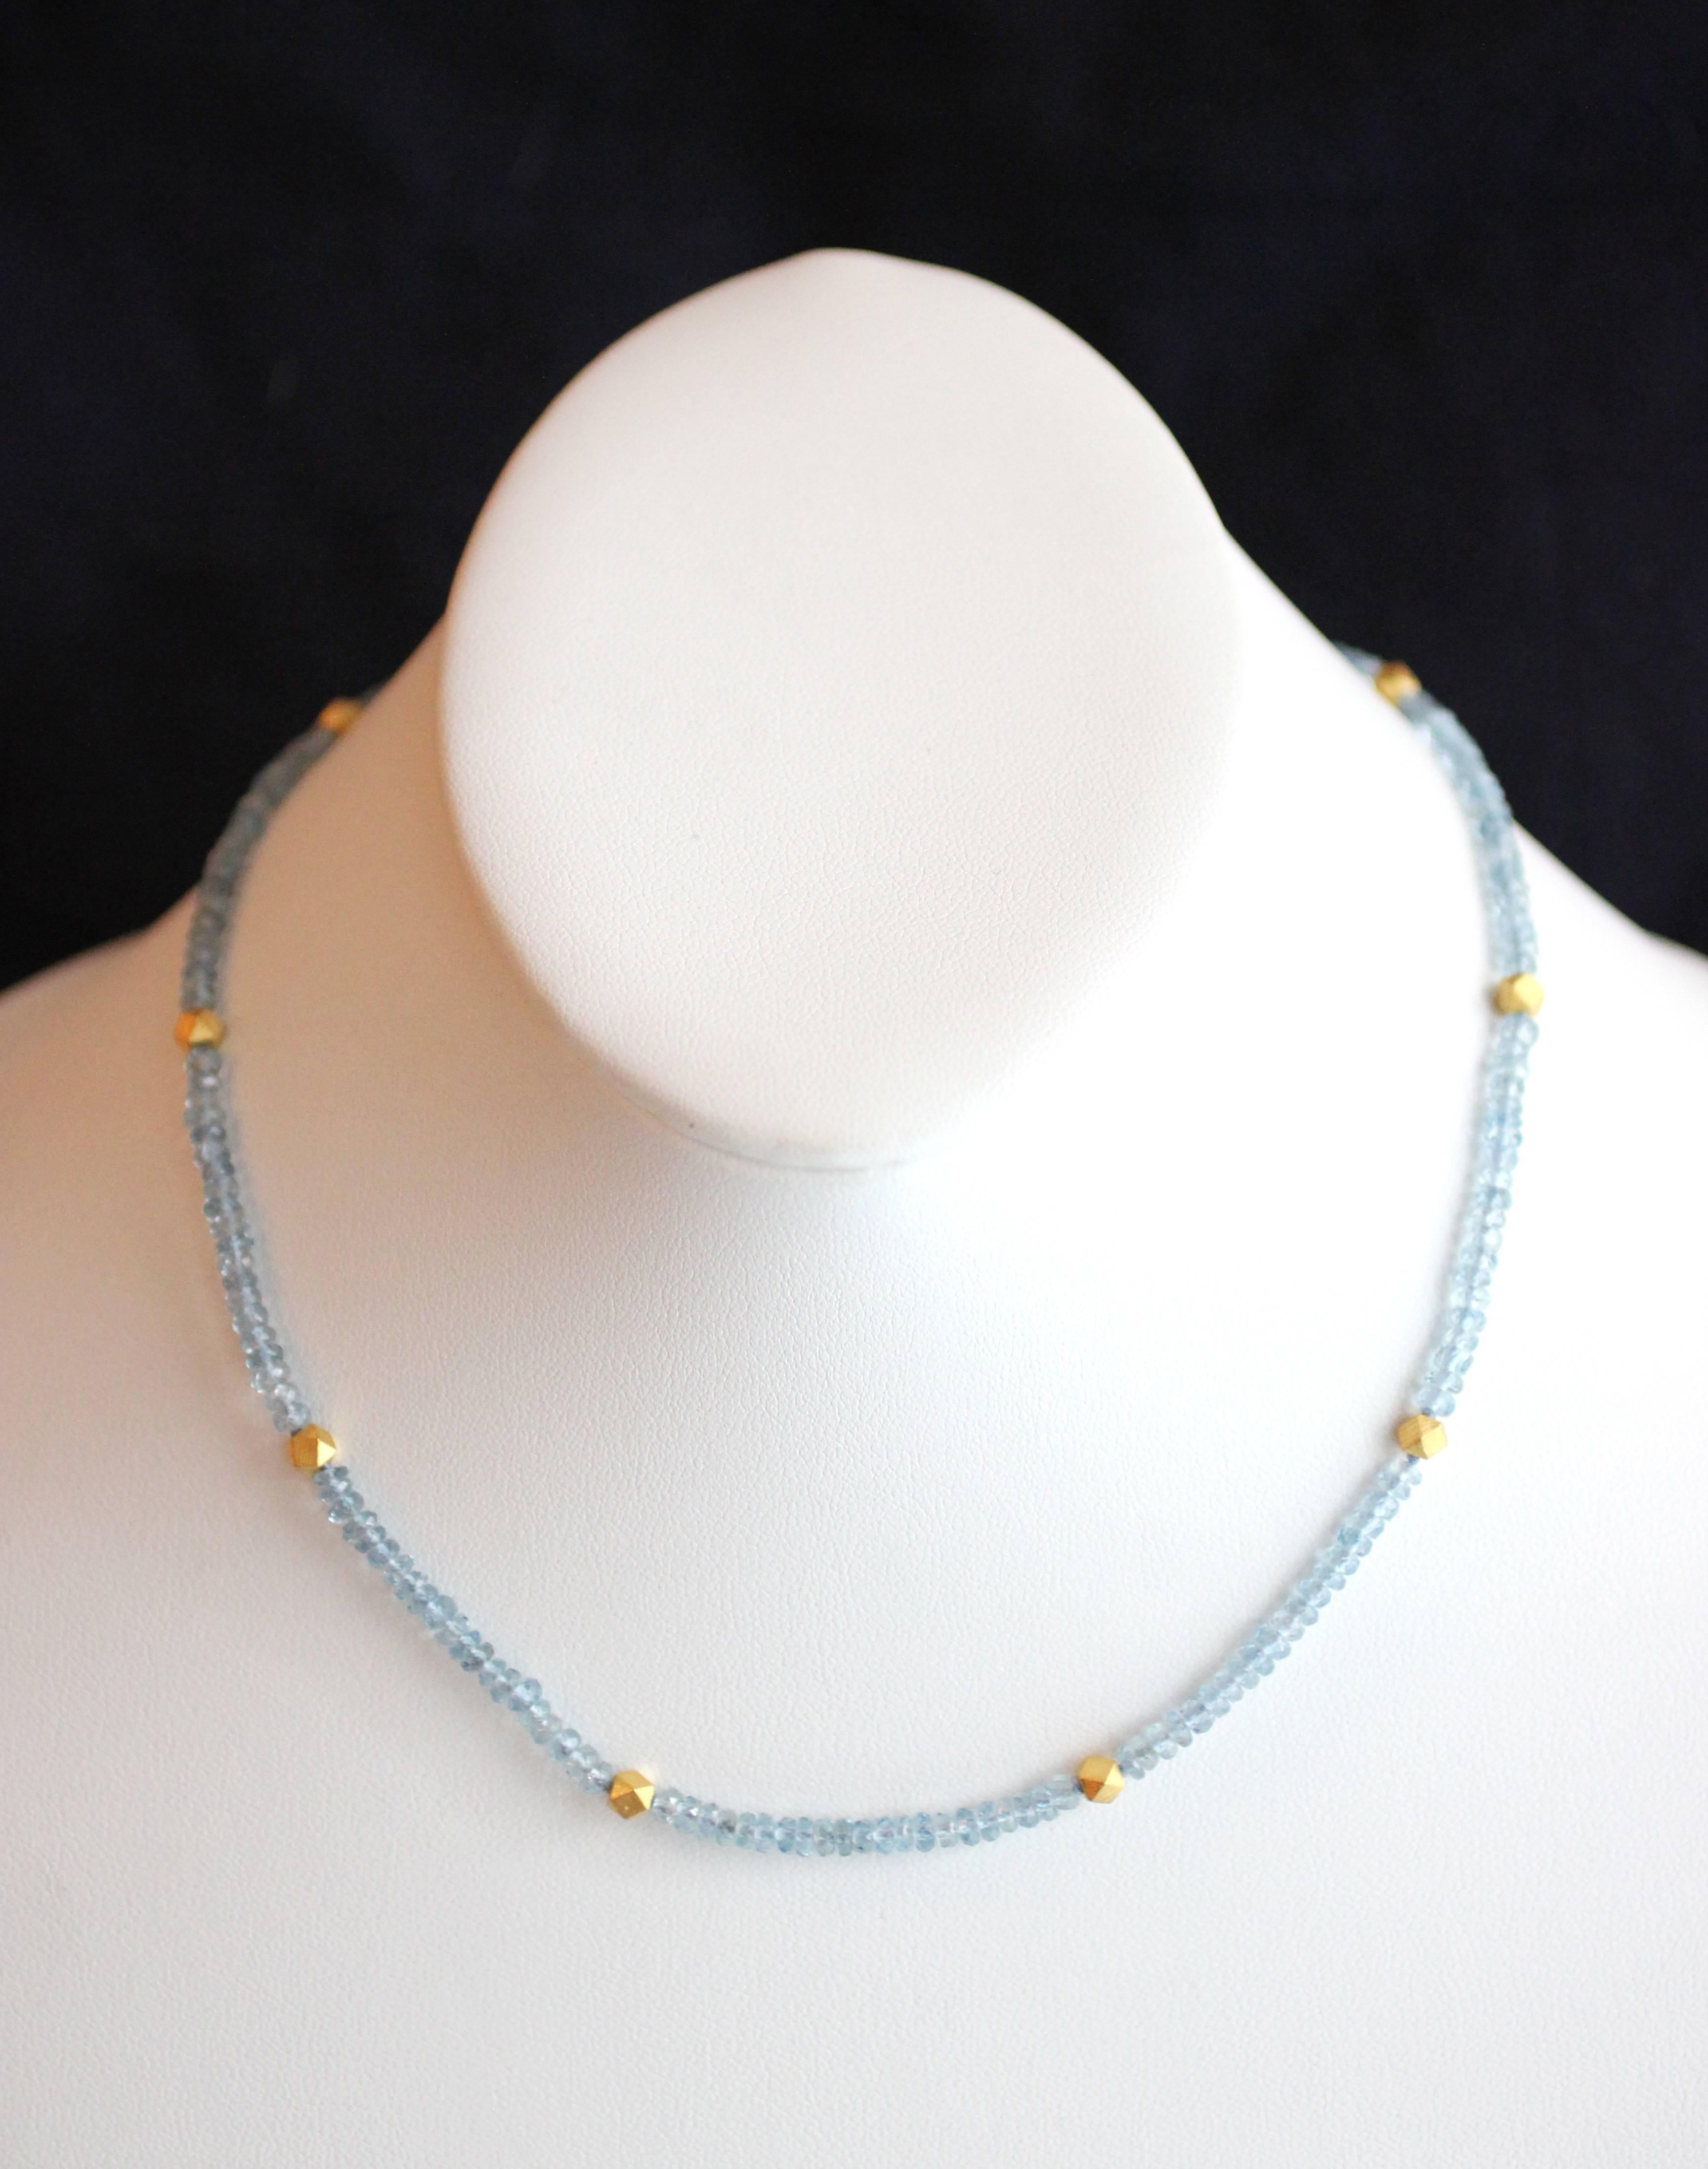 This beautiful and understated necklace contains approximately 37 carats of faceted Aquamarine beads punctuated by 24 Kt Gold Polyhedron Bead rondelles.  Closure is a classic Julius Cohen S-clasp, in 18 Kt Gold for added strength and durability. 